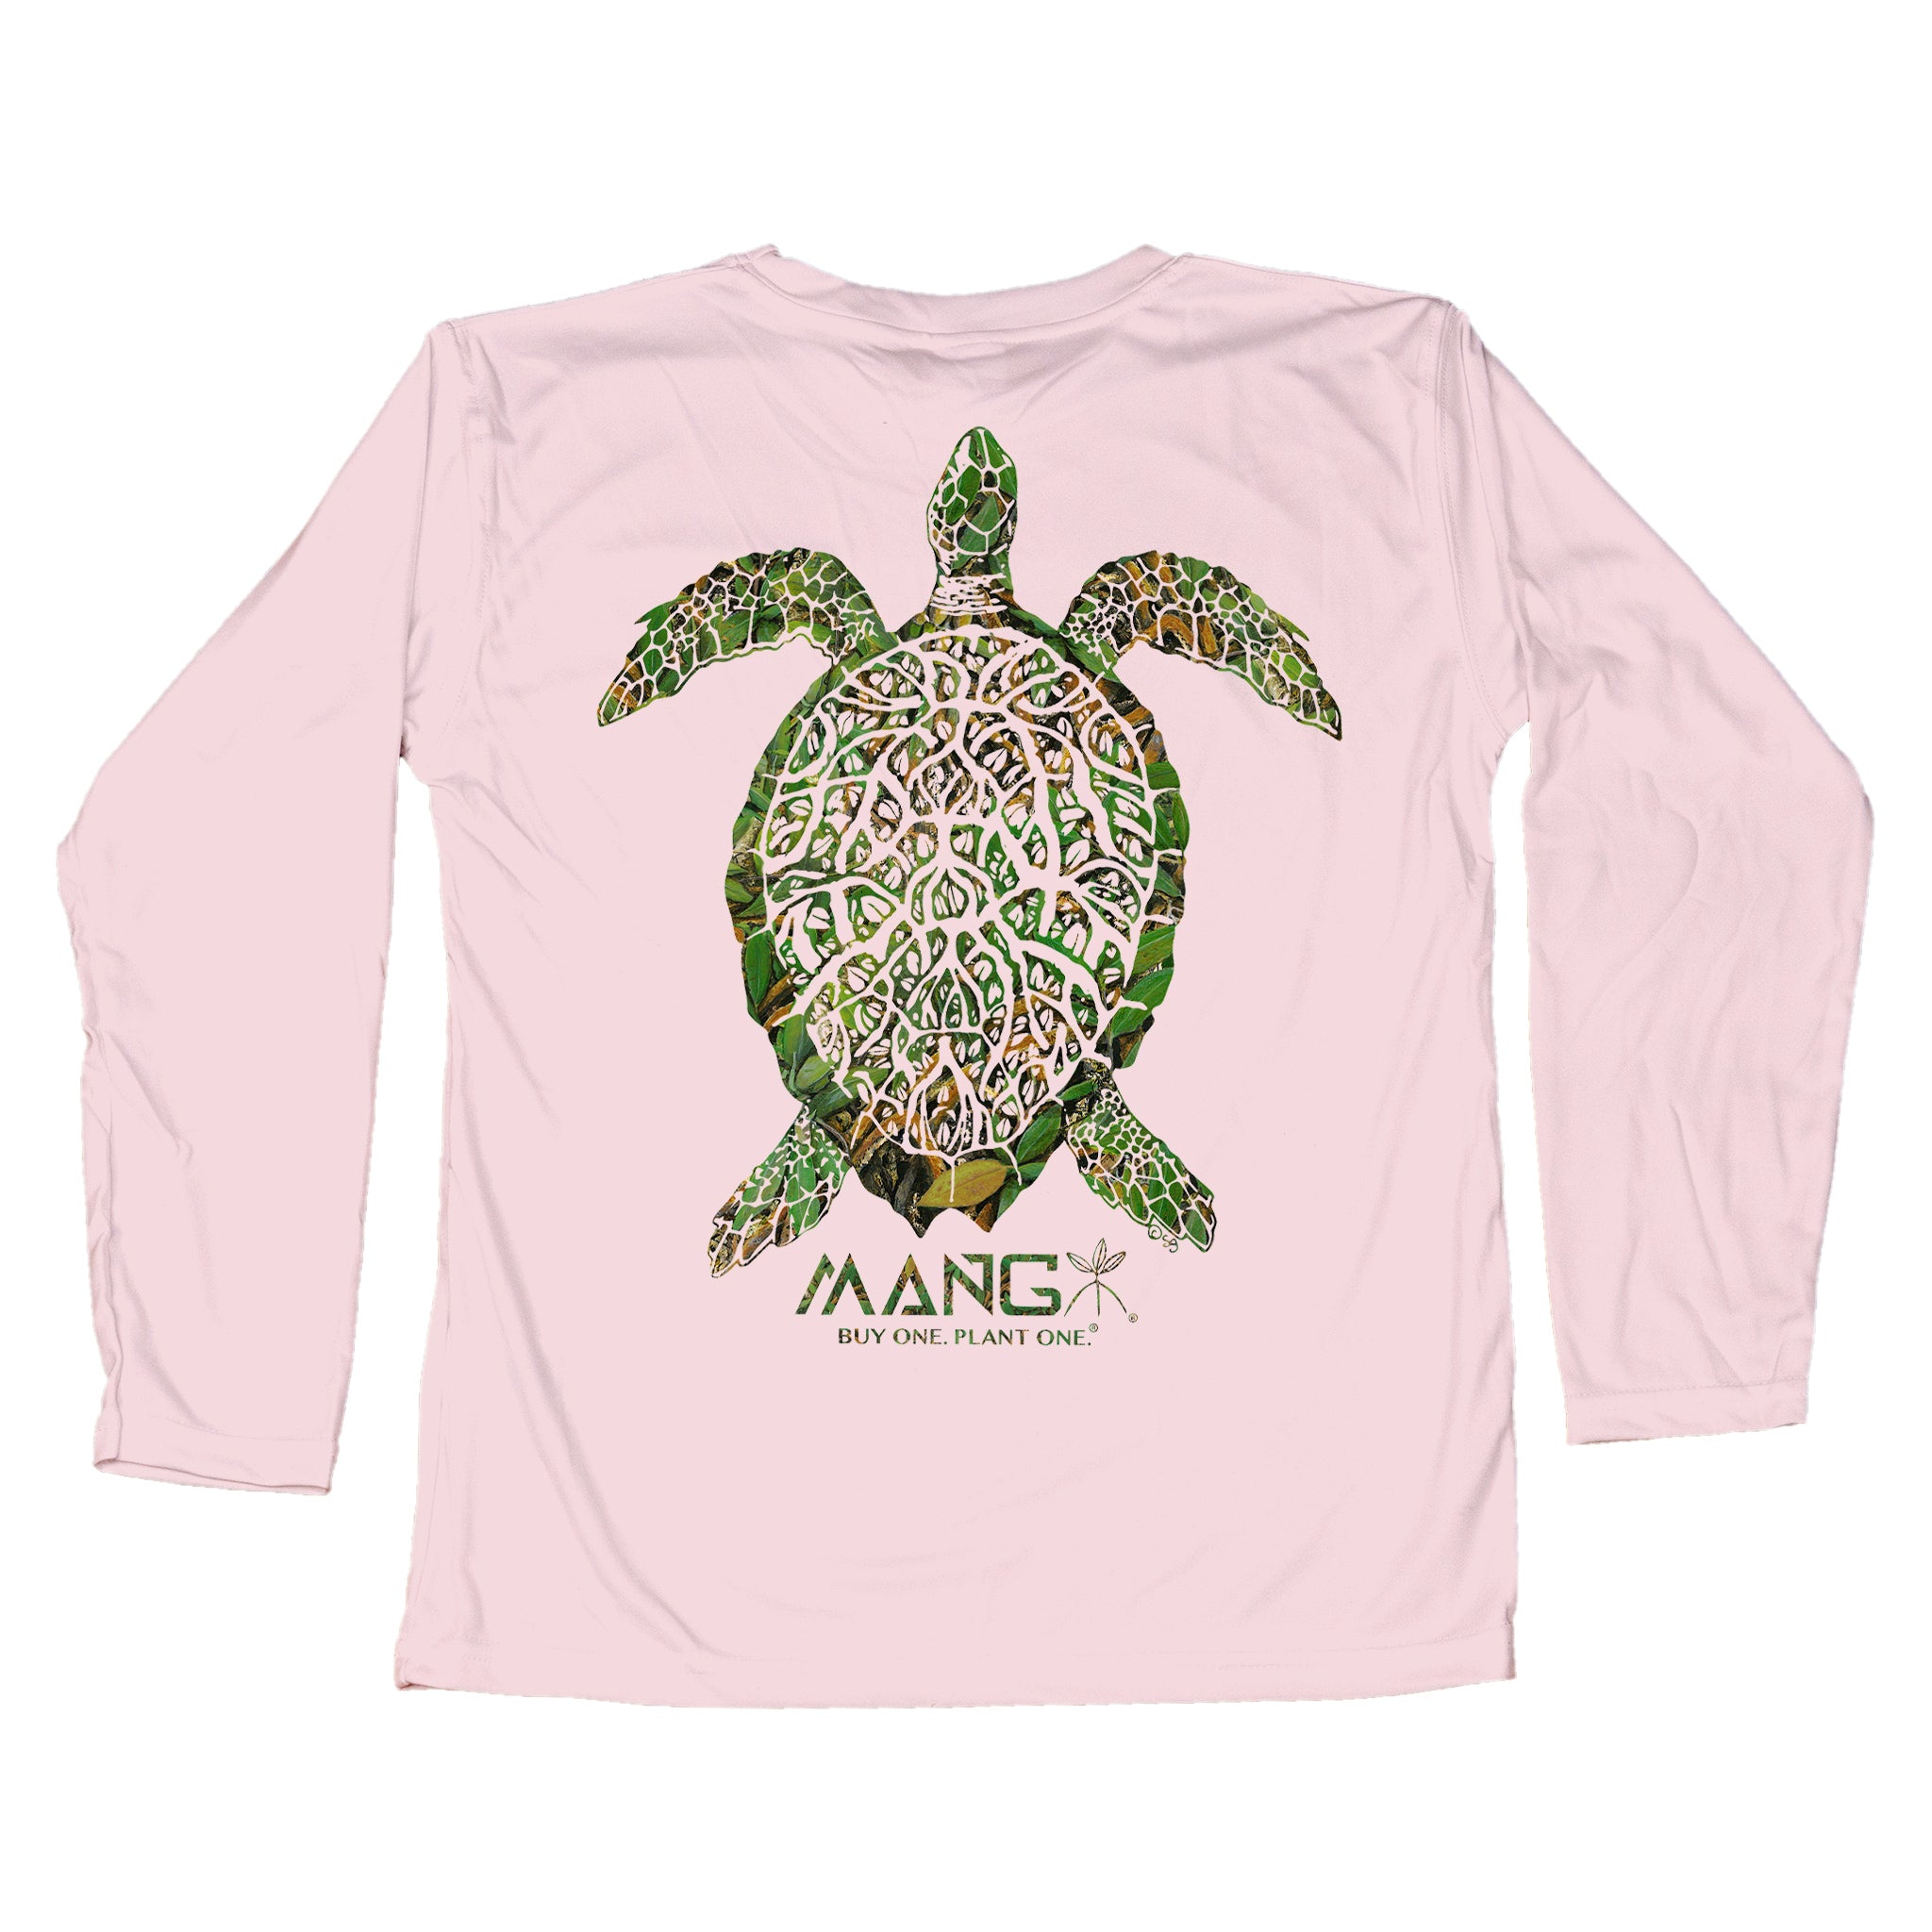 MANG Grassy Turtle - Youth - YS-Pink